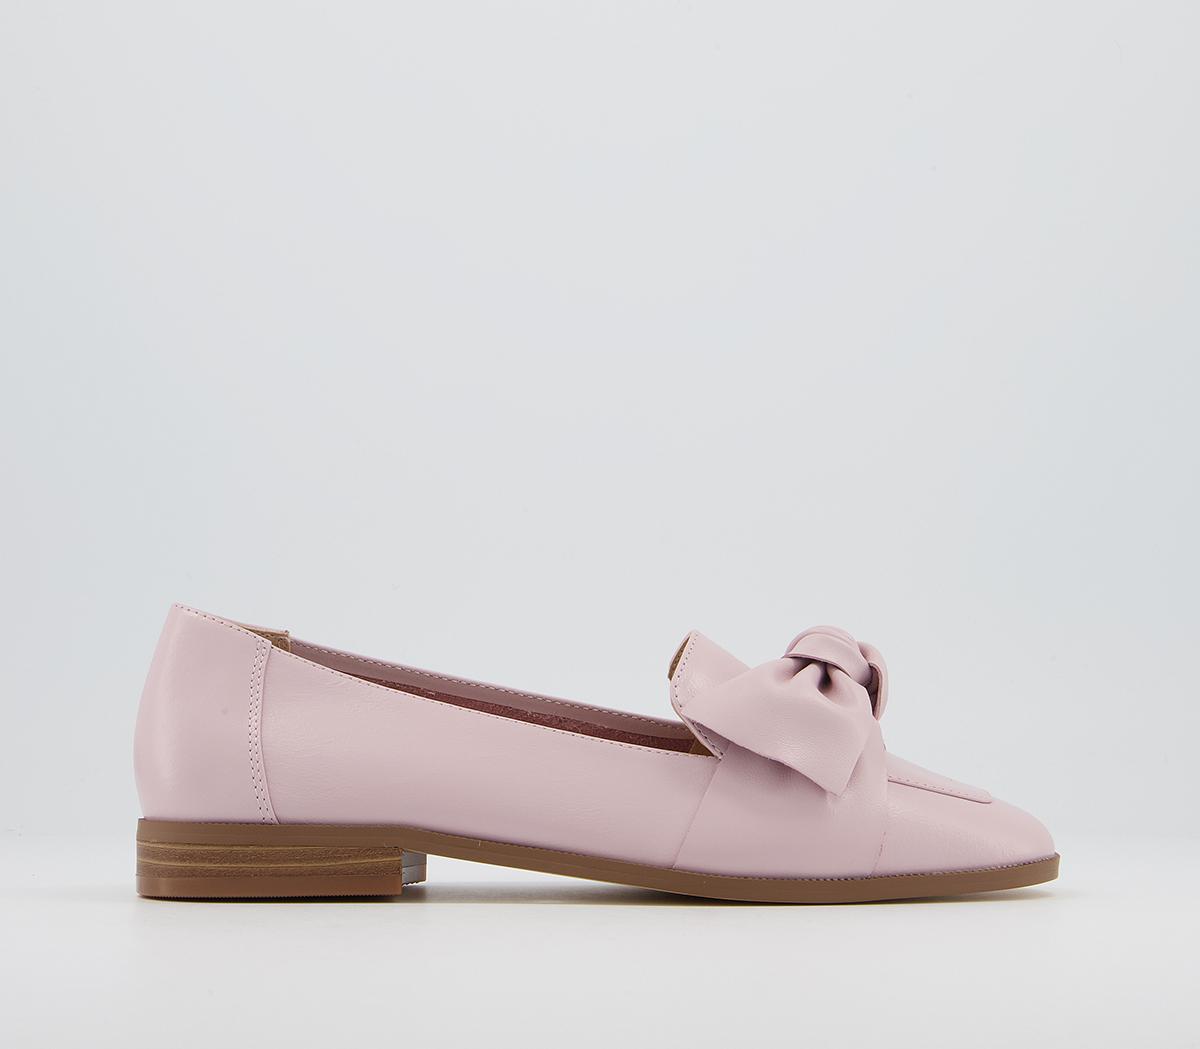 OFFICEFlurry Bow Loafer ShoesPink Leather